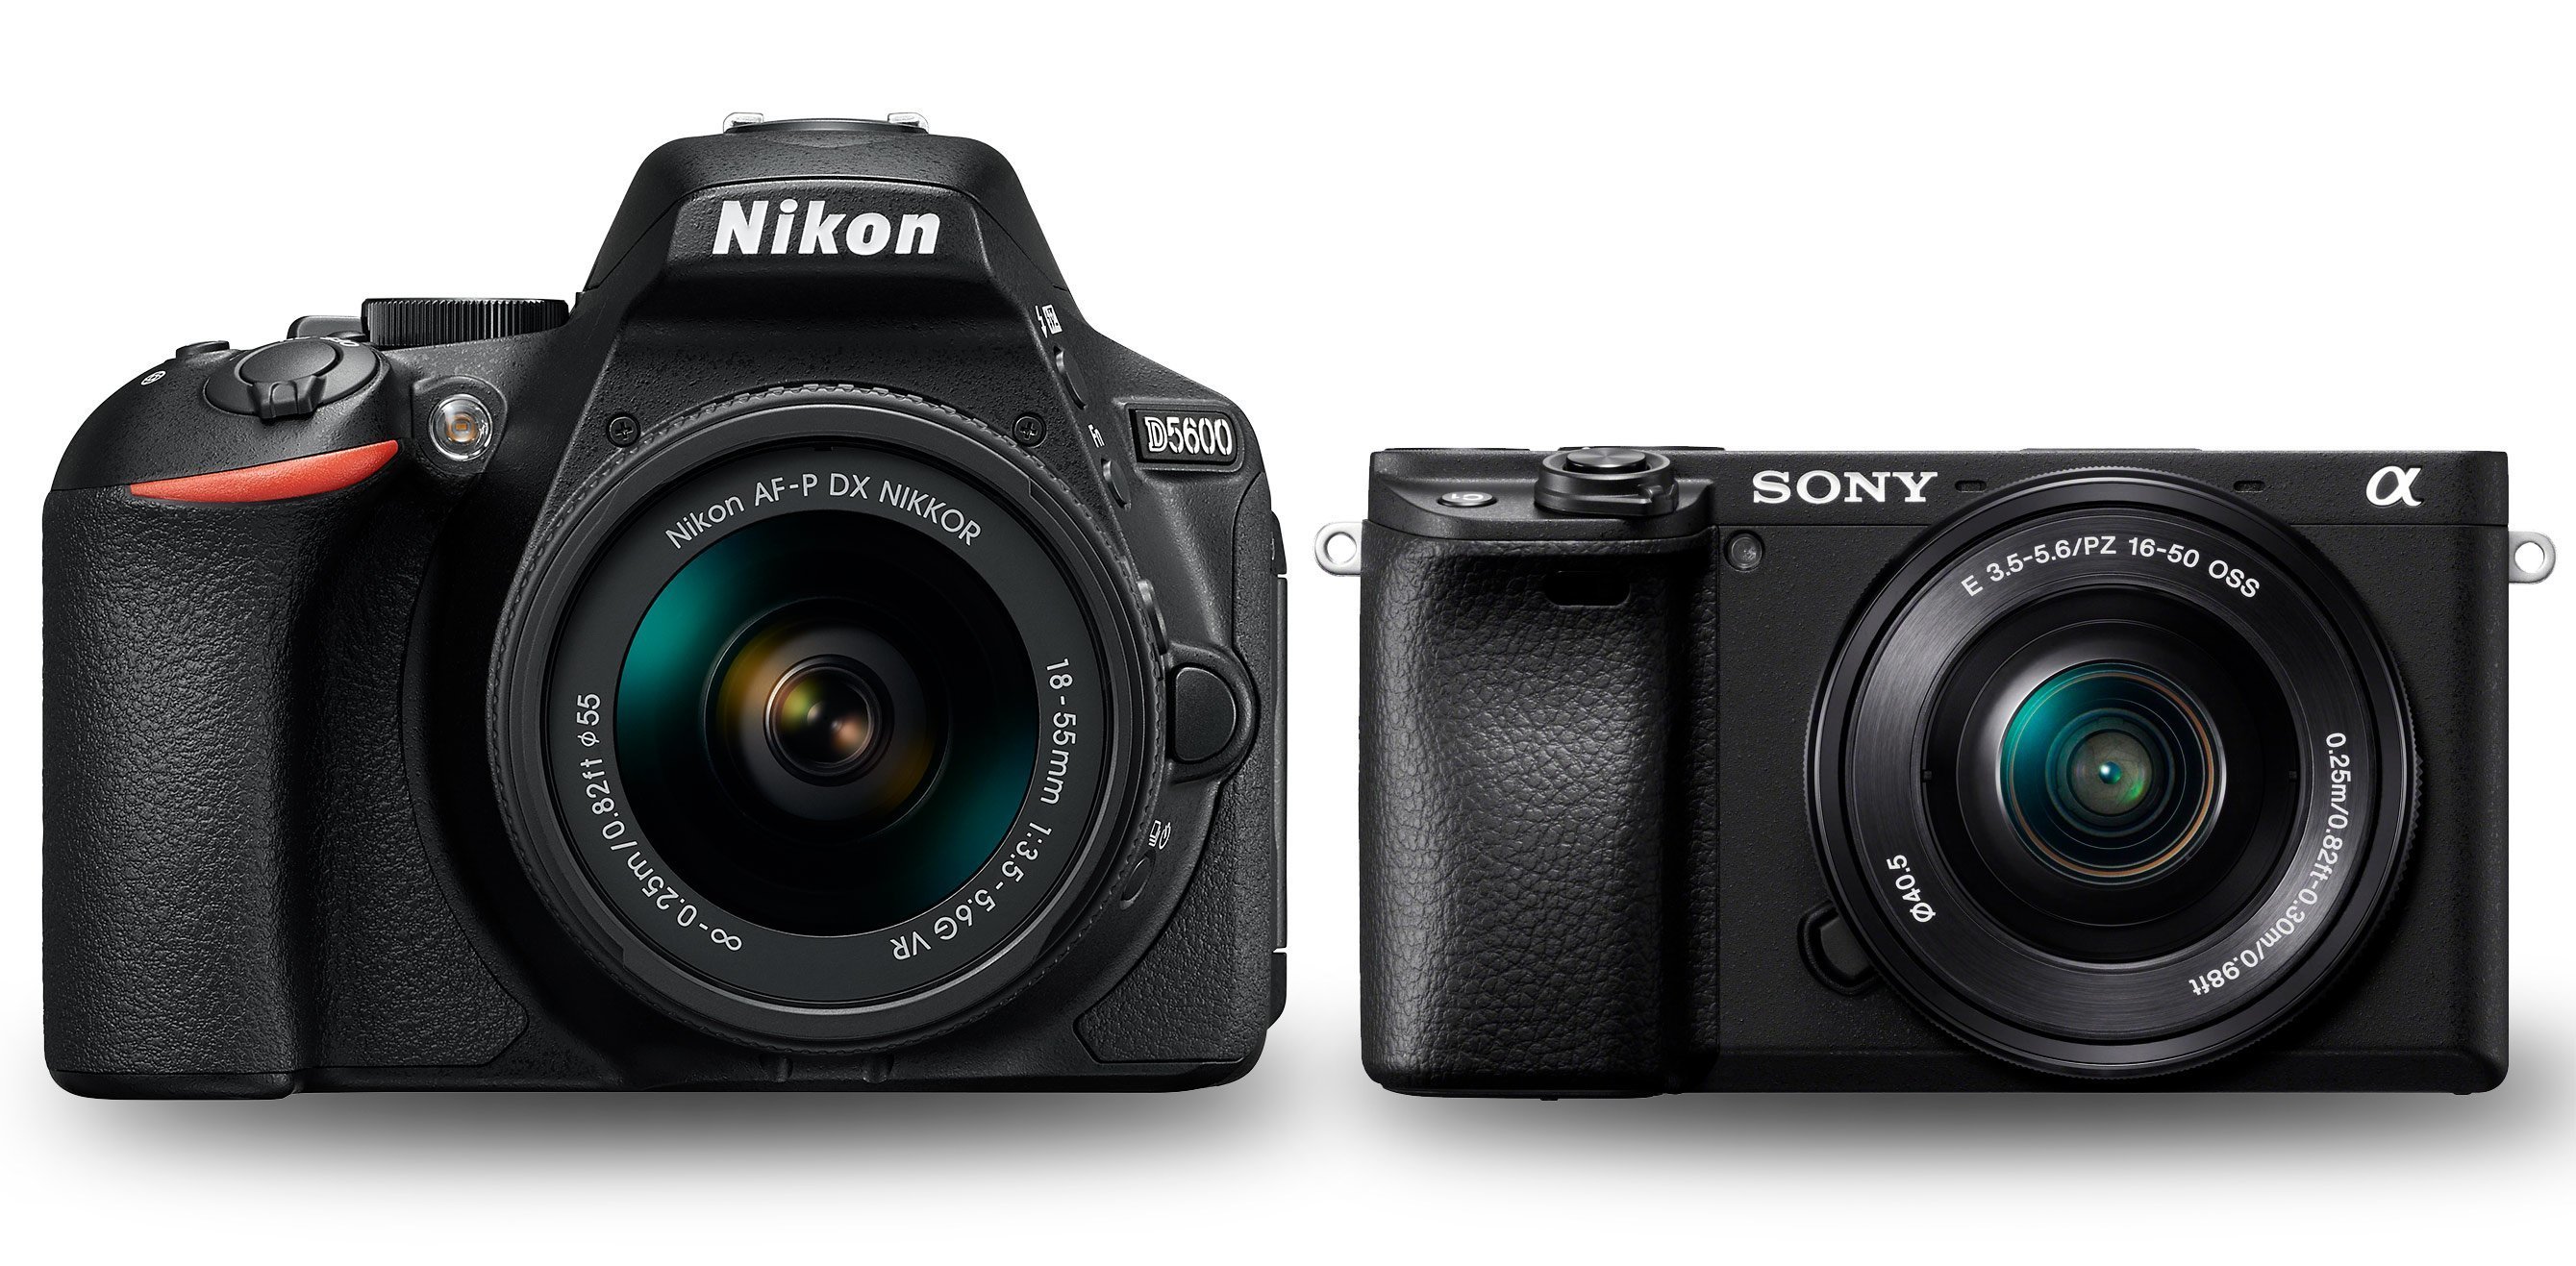 Nikon D5600 a6400: Which Should You Buy? - And Matter